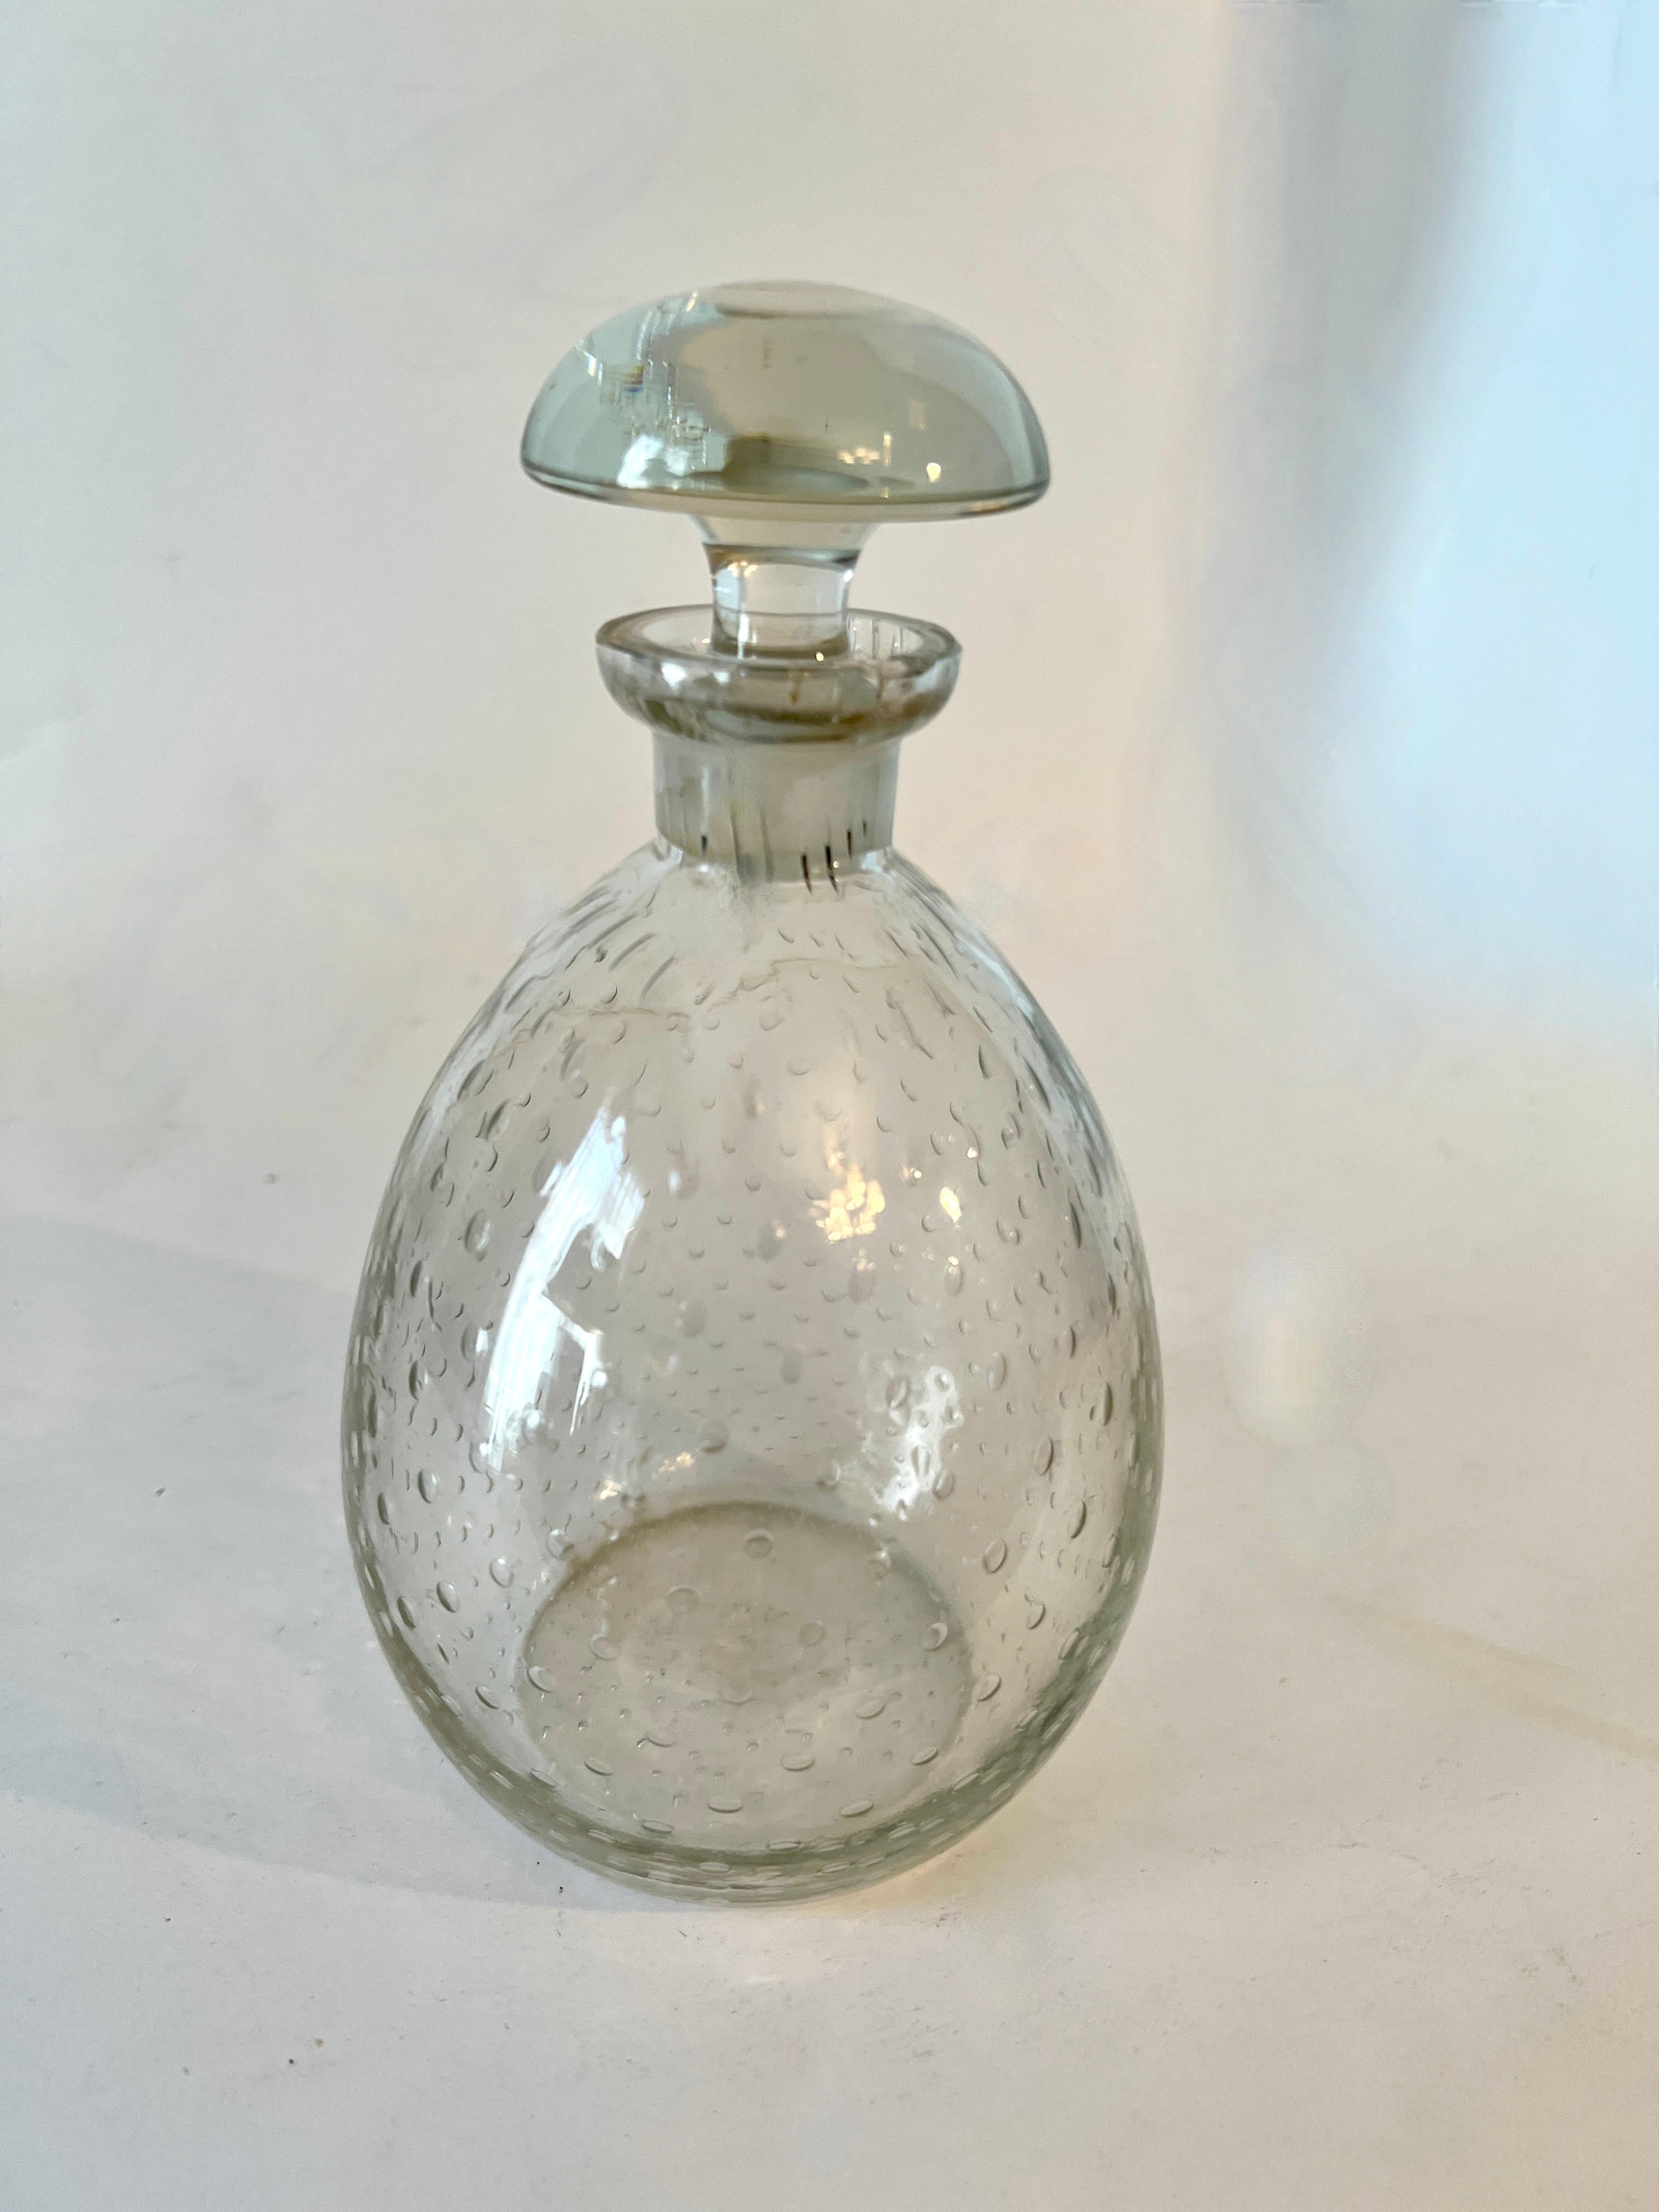 A small Decanter with stopper.  The piece is a nice addition to the bar for those small amounts of liquor or aperitif.

Additionally, we like this size decanter for the bathroom to hold mouthwash!  A very attractive way to display mouthwash on the